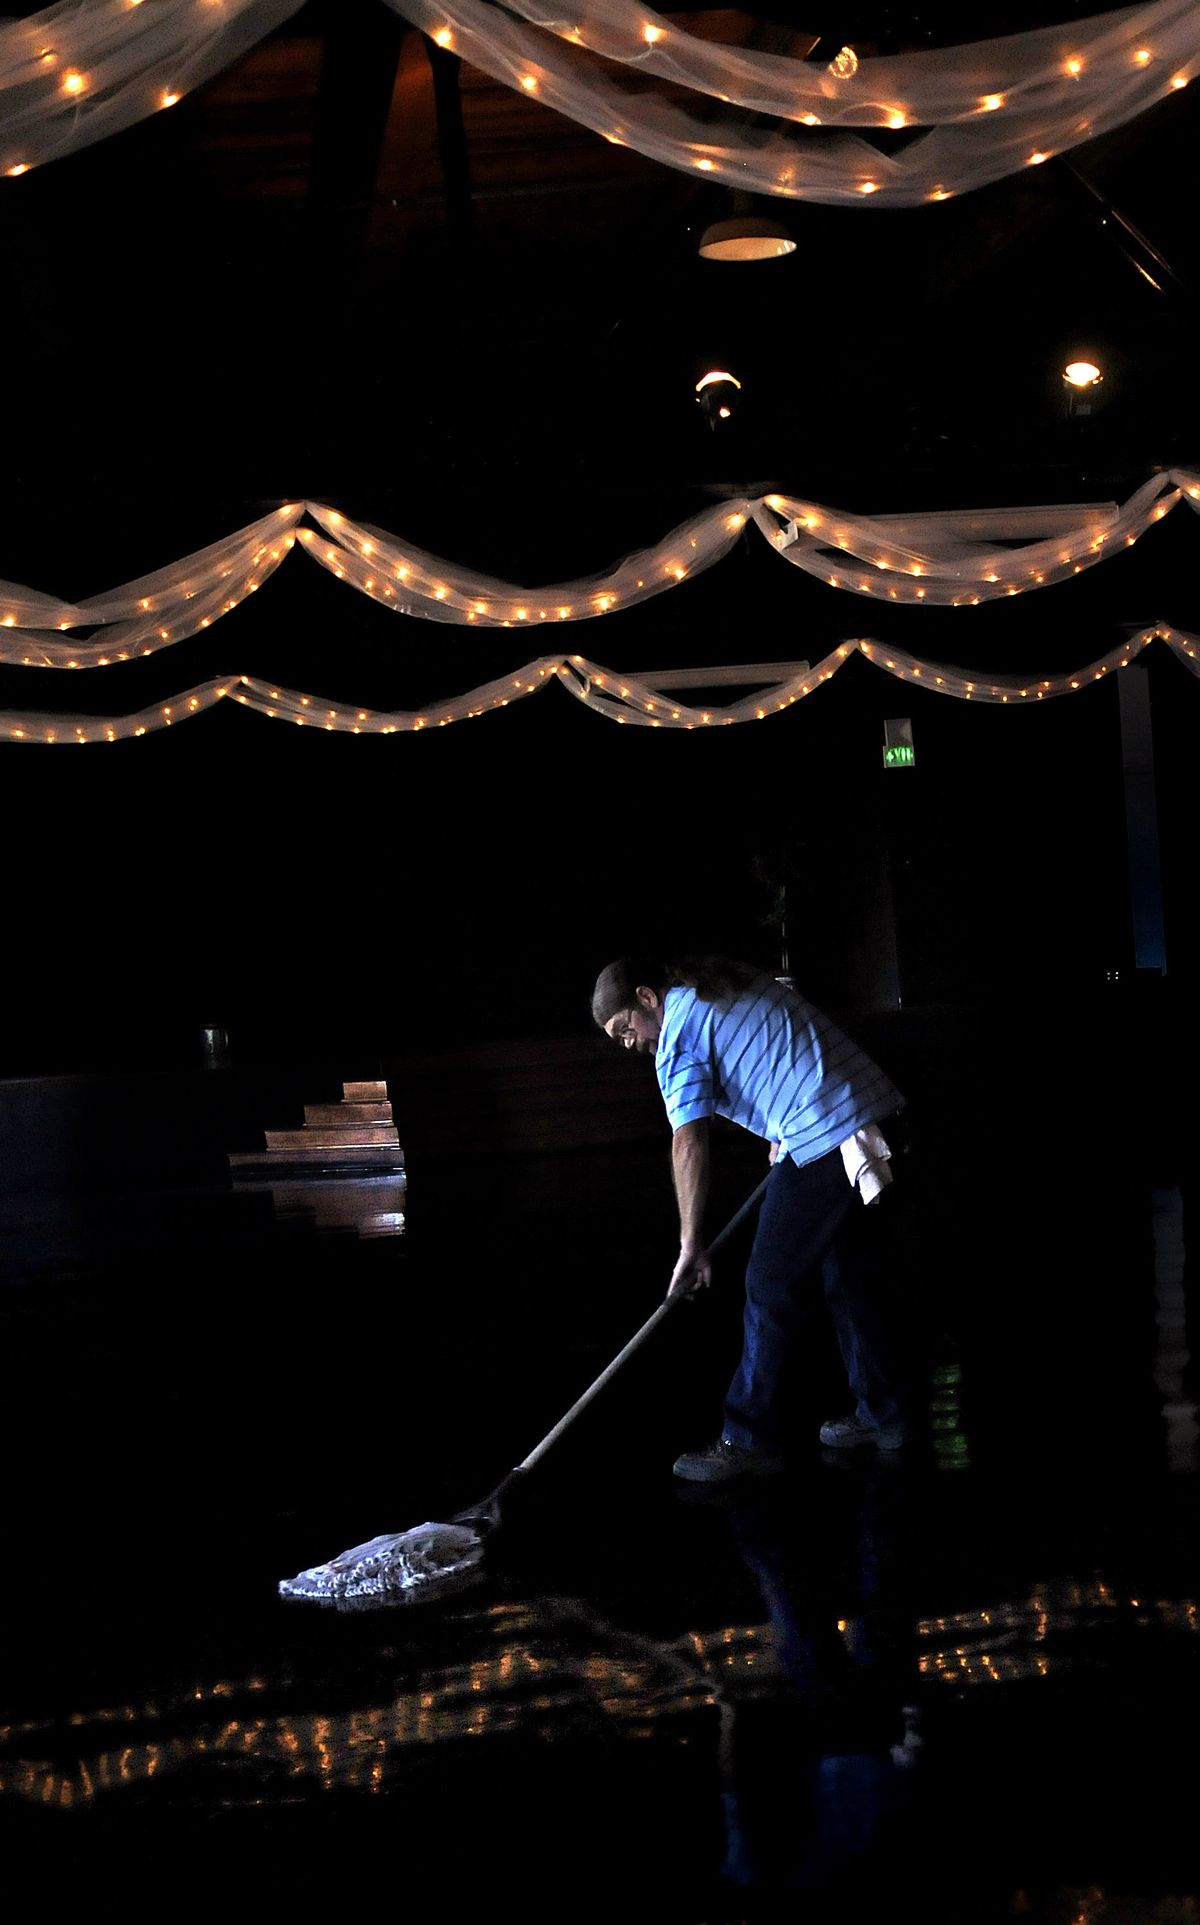 Spokane resident John Grant, 56, mops the floor at the Masonic Center in Spokane last week. Hit hard by the recession, Grant took a part-time janitorial position at the center. He estimates he’s filled out at least 150 job applications in the last nine months. He doesn’t think he’ll ever be able to retire.kathypl@spokesman.com (Kathy Plonka / The Spokesman-Review)